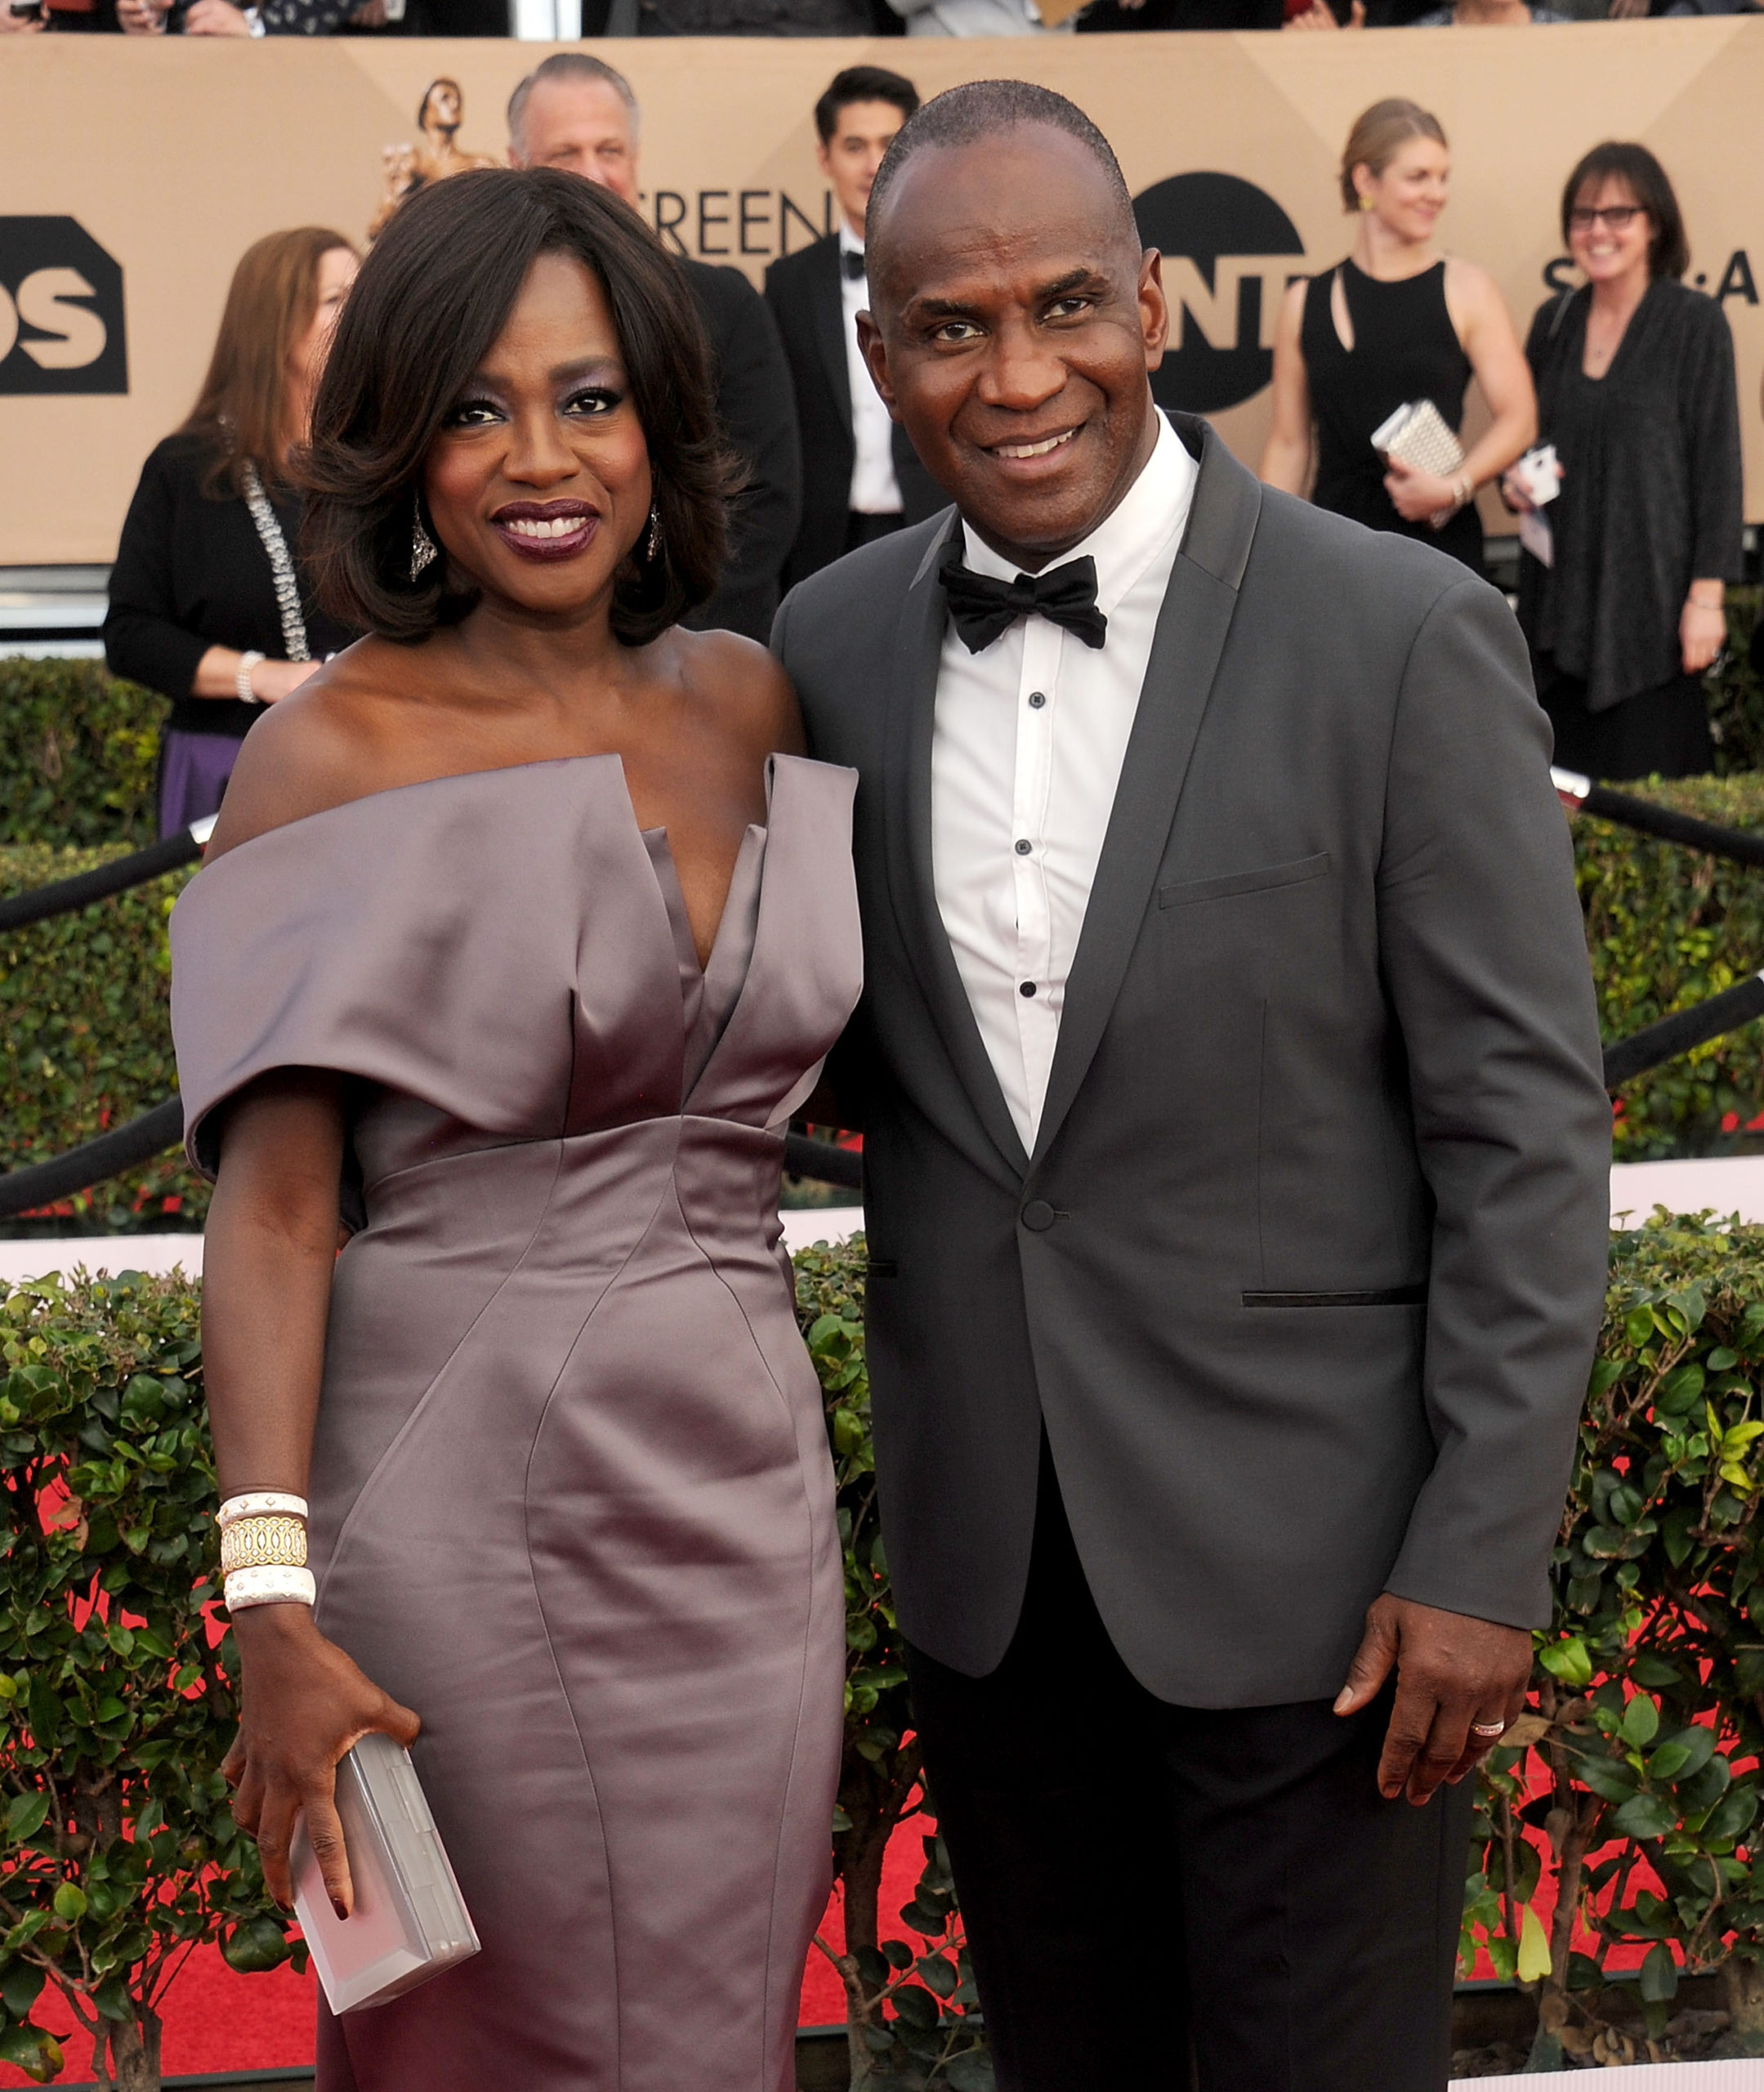 Who Is Viola Davis Dating? Ex-Boyfriend, Relationship Timeline And Much More